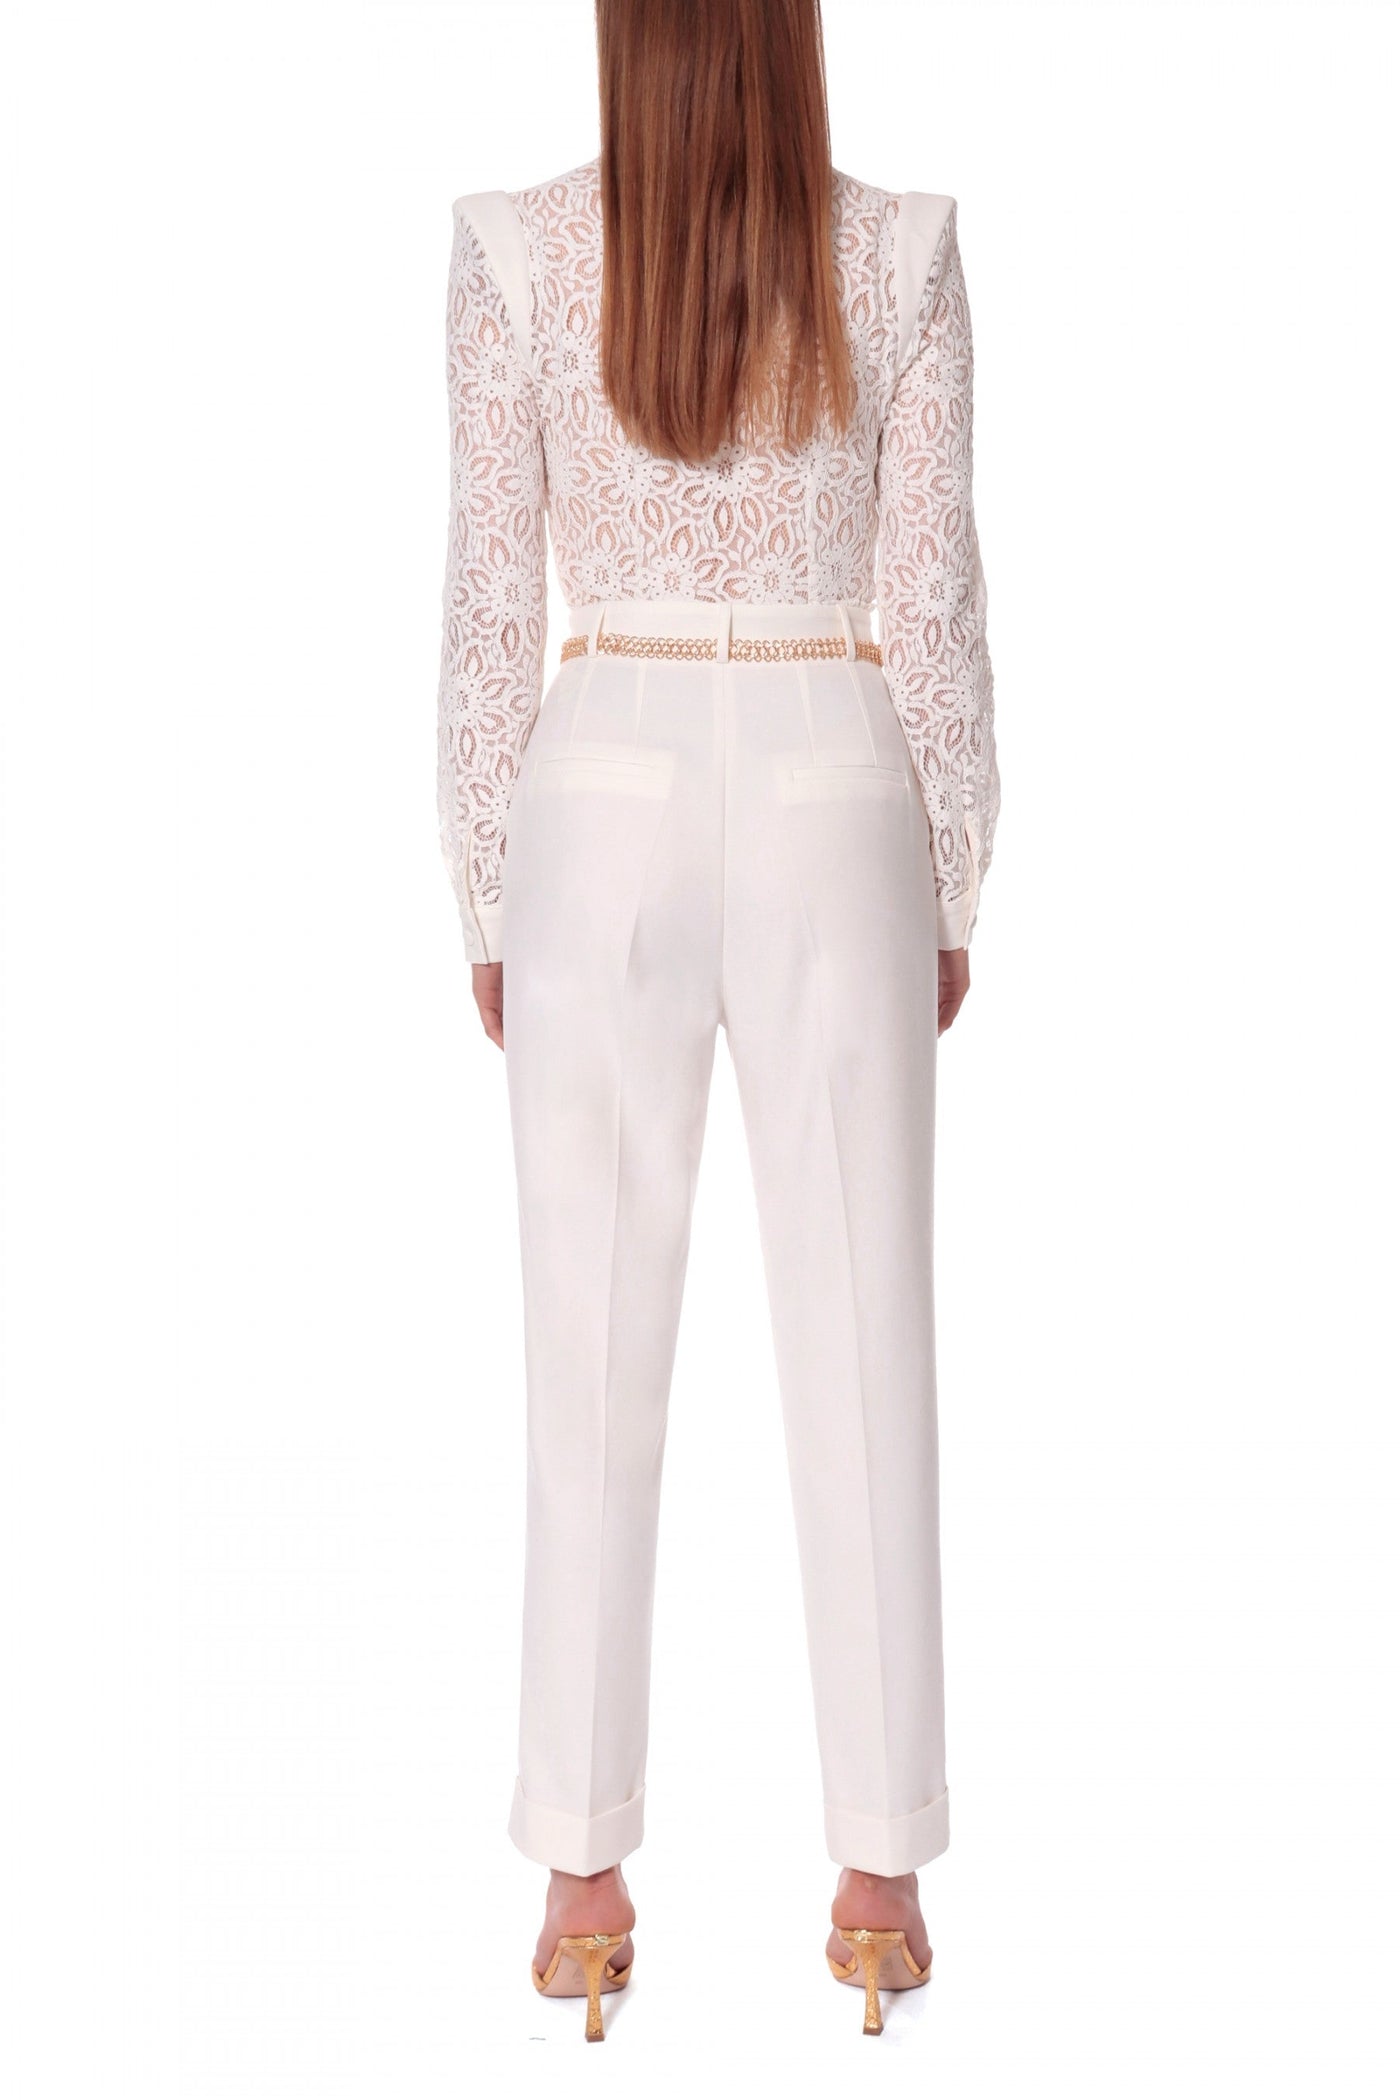 Aylin Aesthetic White Lace Top Jumpsuit